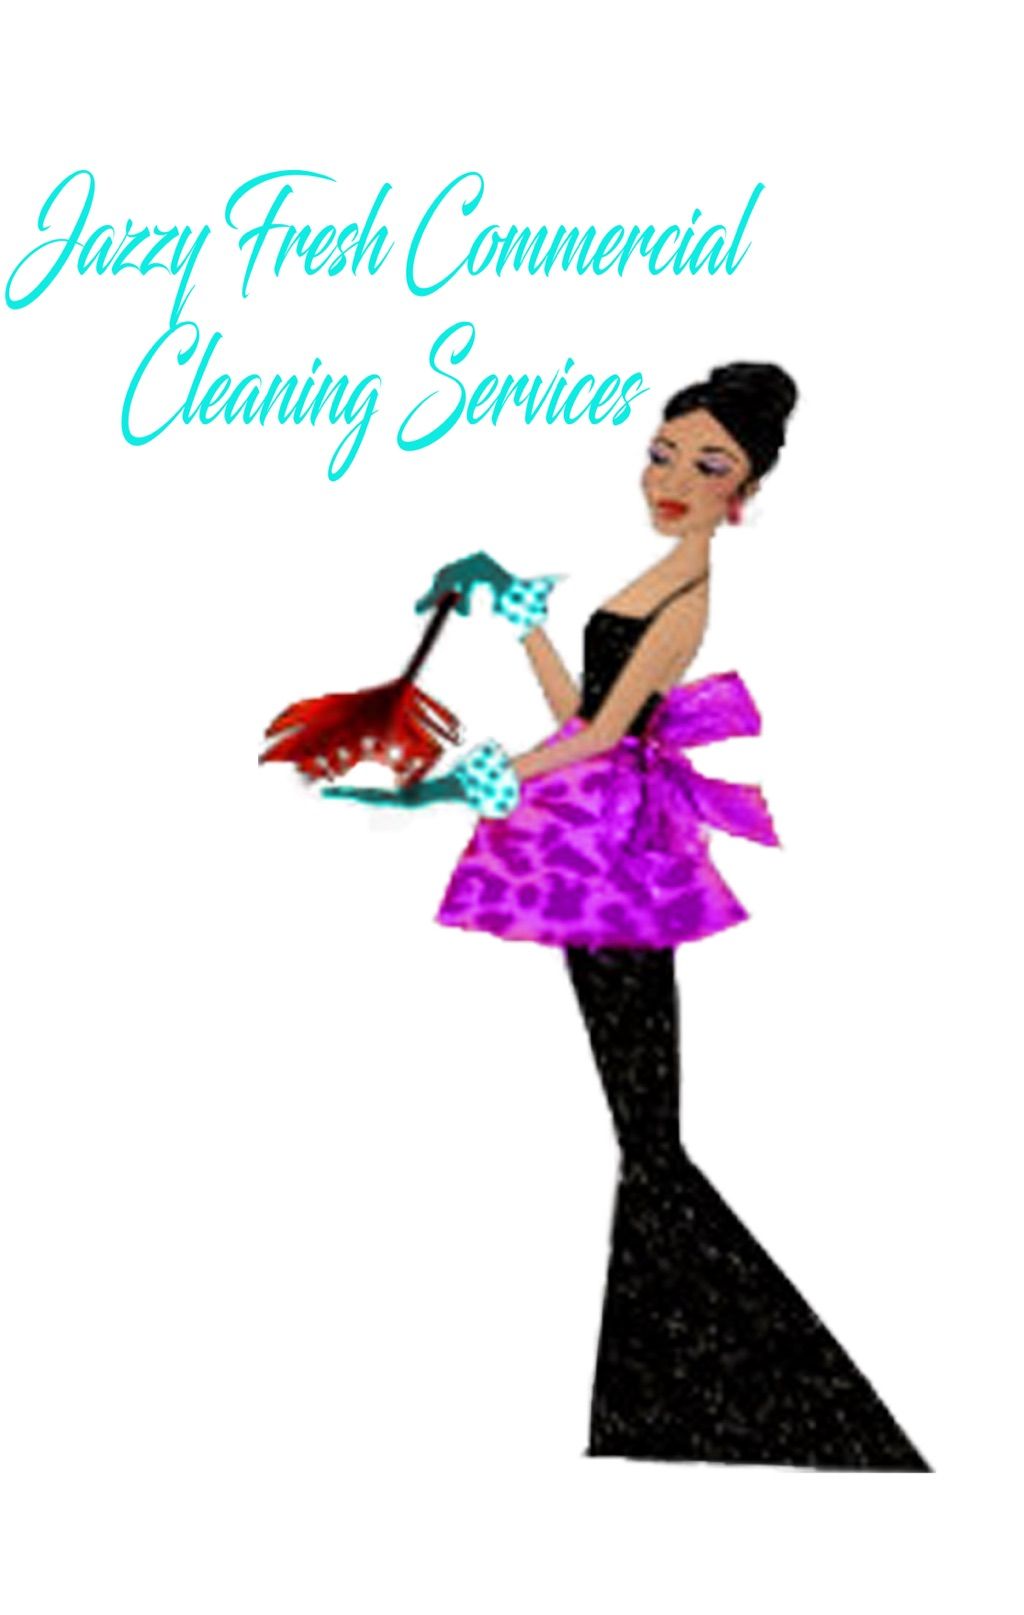 Jazzyfresh Commercial Cleaning Service LLC